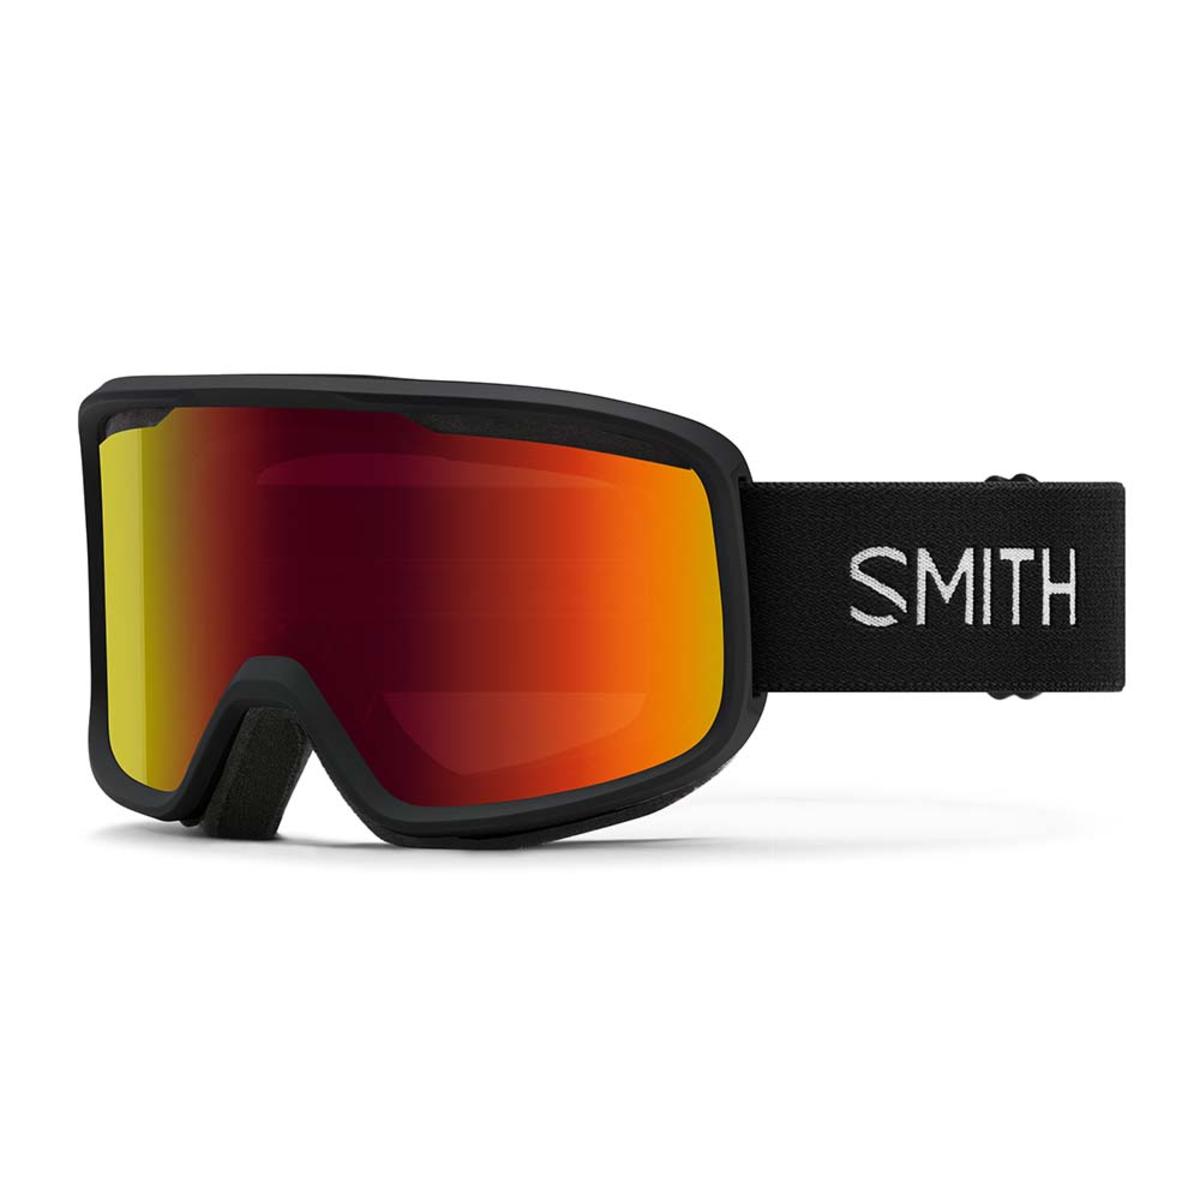 Smith Optics Frontier Goggles Red Sol-X Mirror - Black Frame